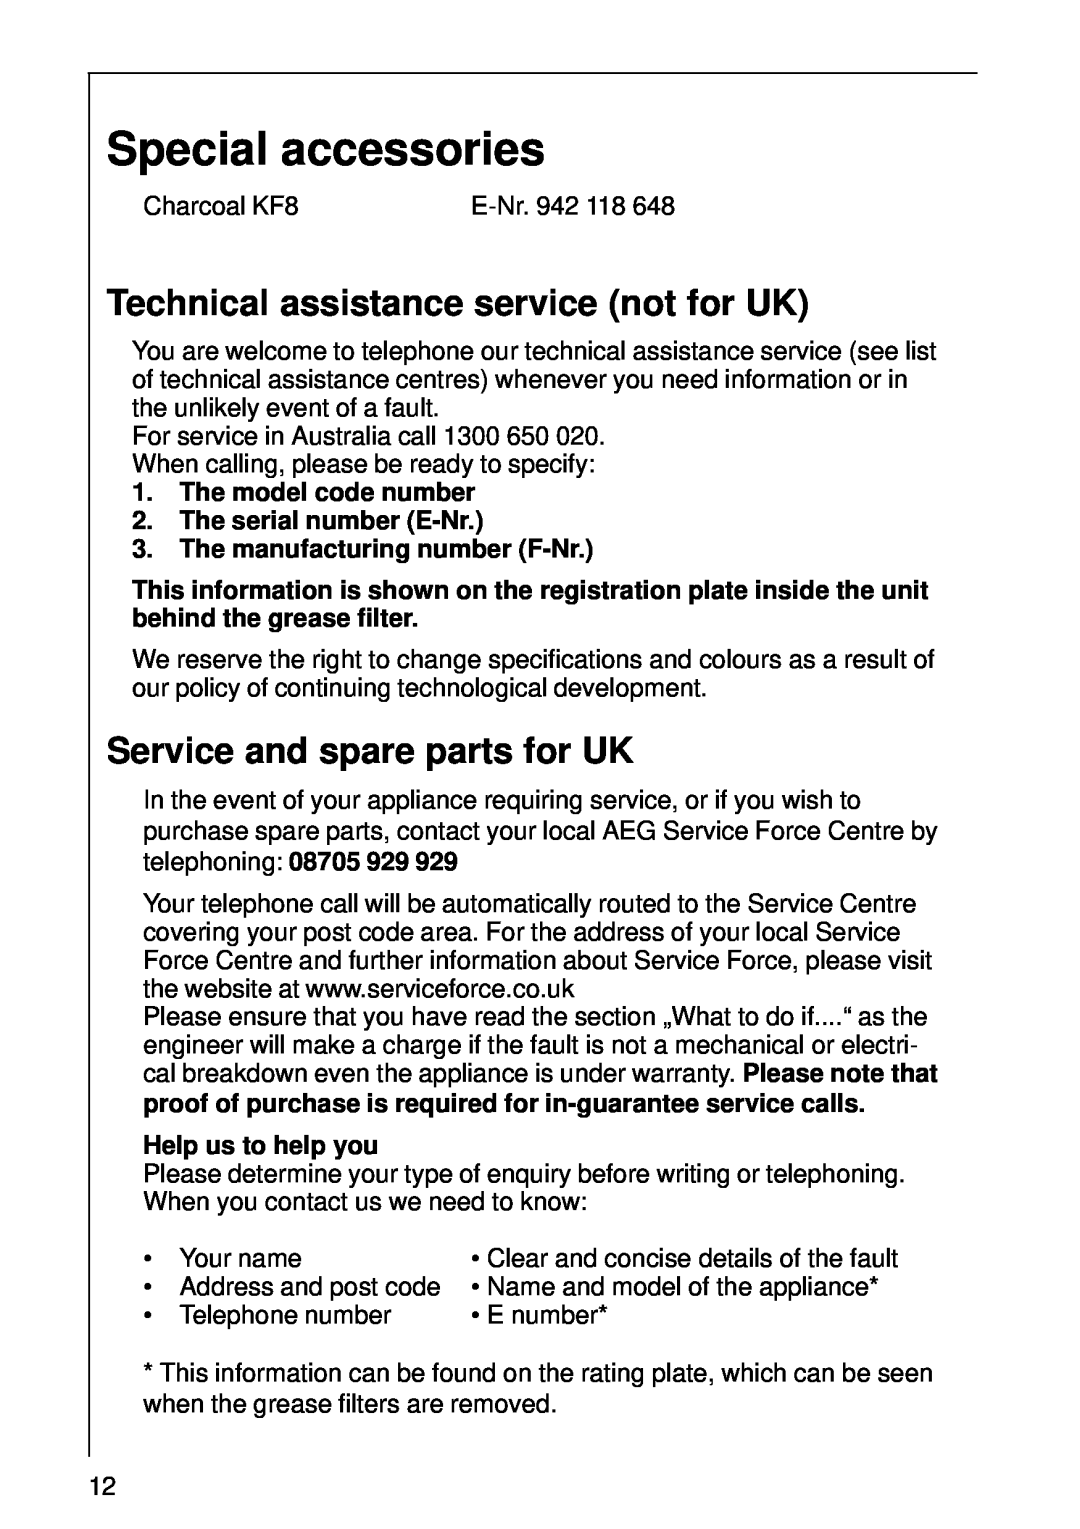 AEG 8190 D, 8361 D, 8290 D Special accessories, Technical assistance service not for UK, Service and spare parts for UK 